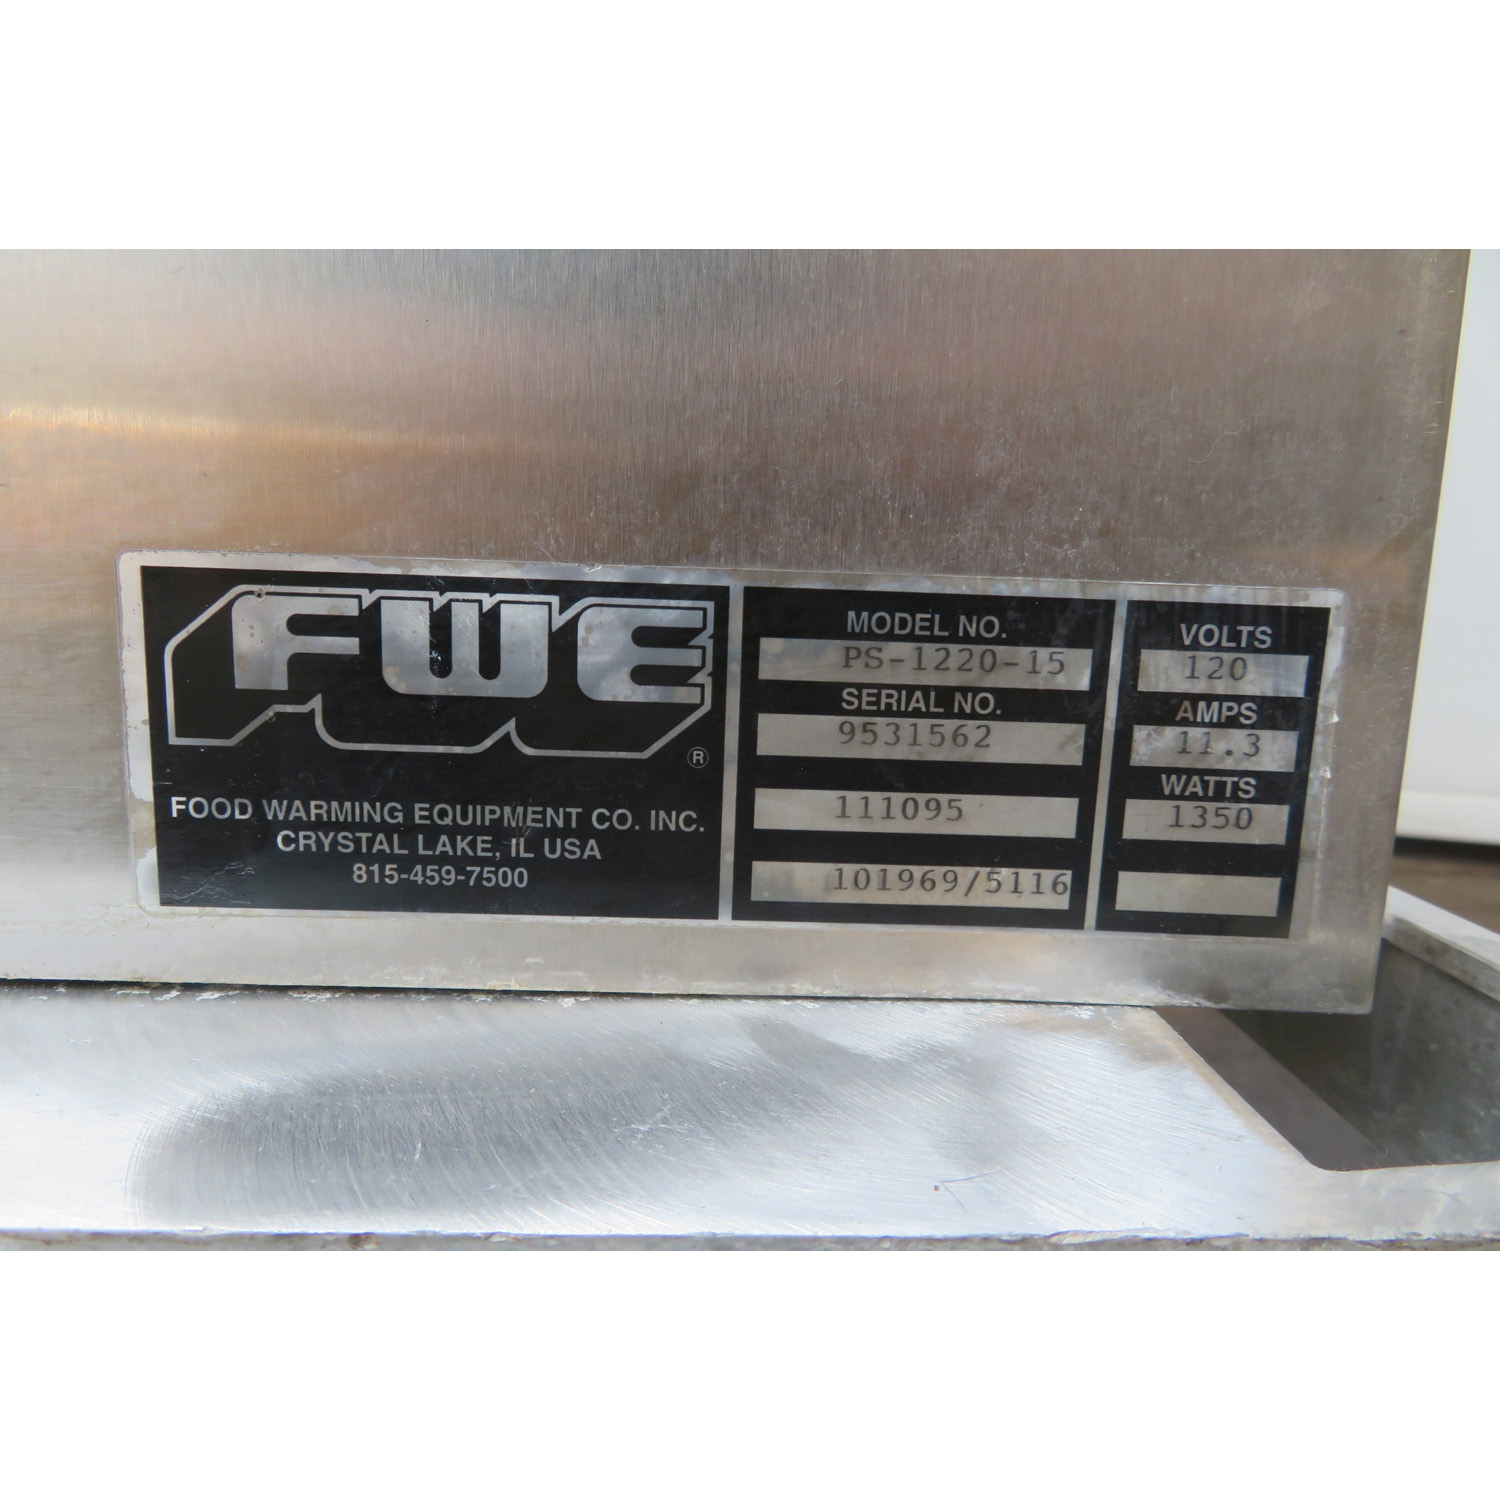 FWE PS-1220-15 Full Height Insulated Mobile Heated Cabinet, Used Excellent Condition image 4